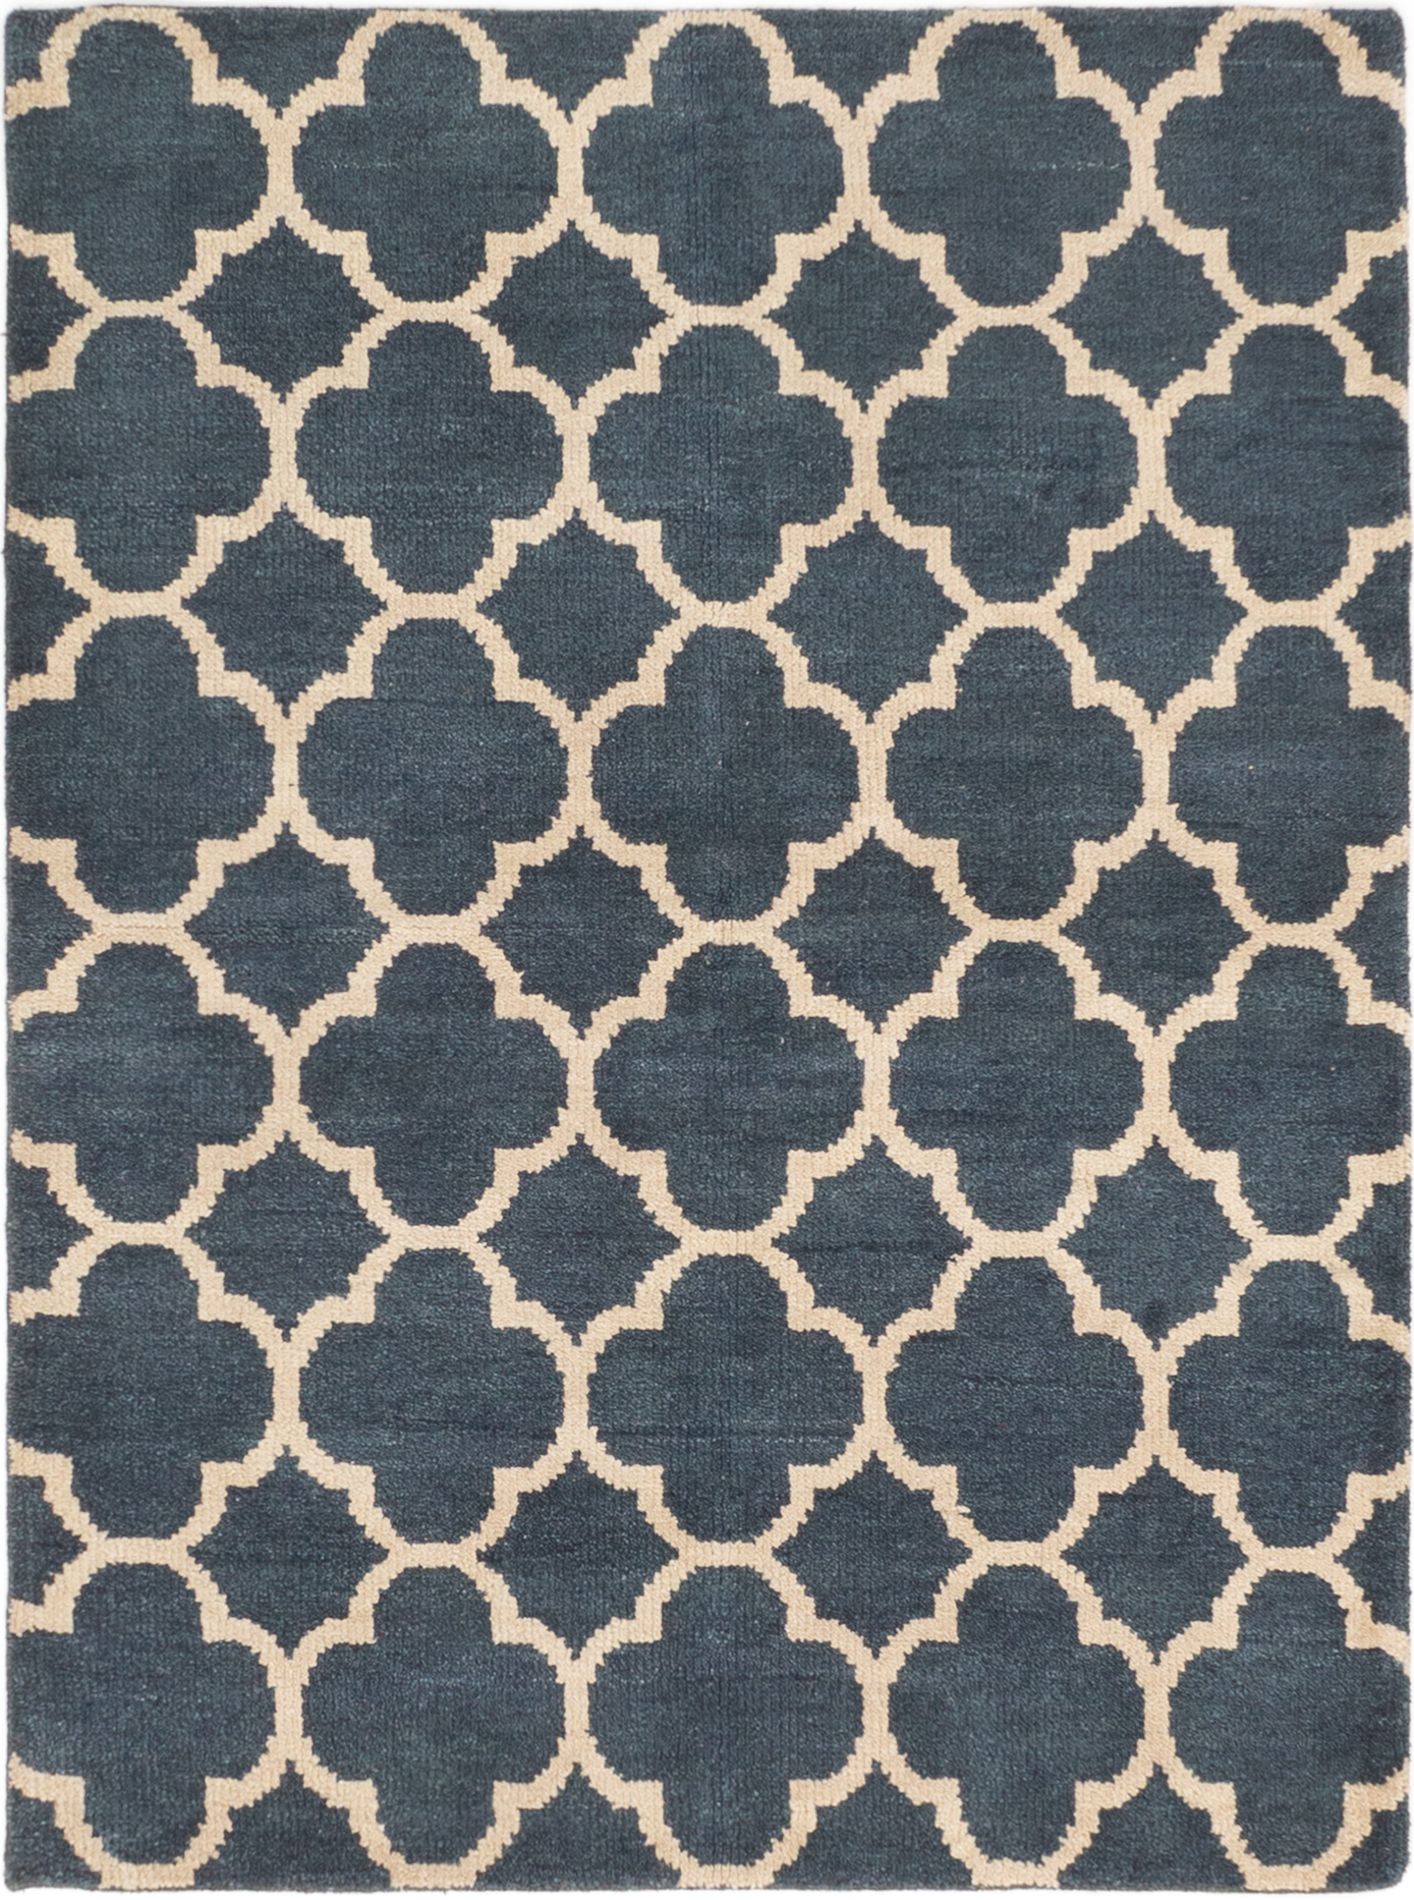 Hand-knotted Eternity Dark Navy Wool Rug 4'9" x 6'4" Size: 4'9" x 6'4"  